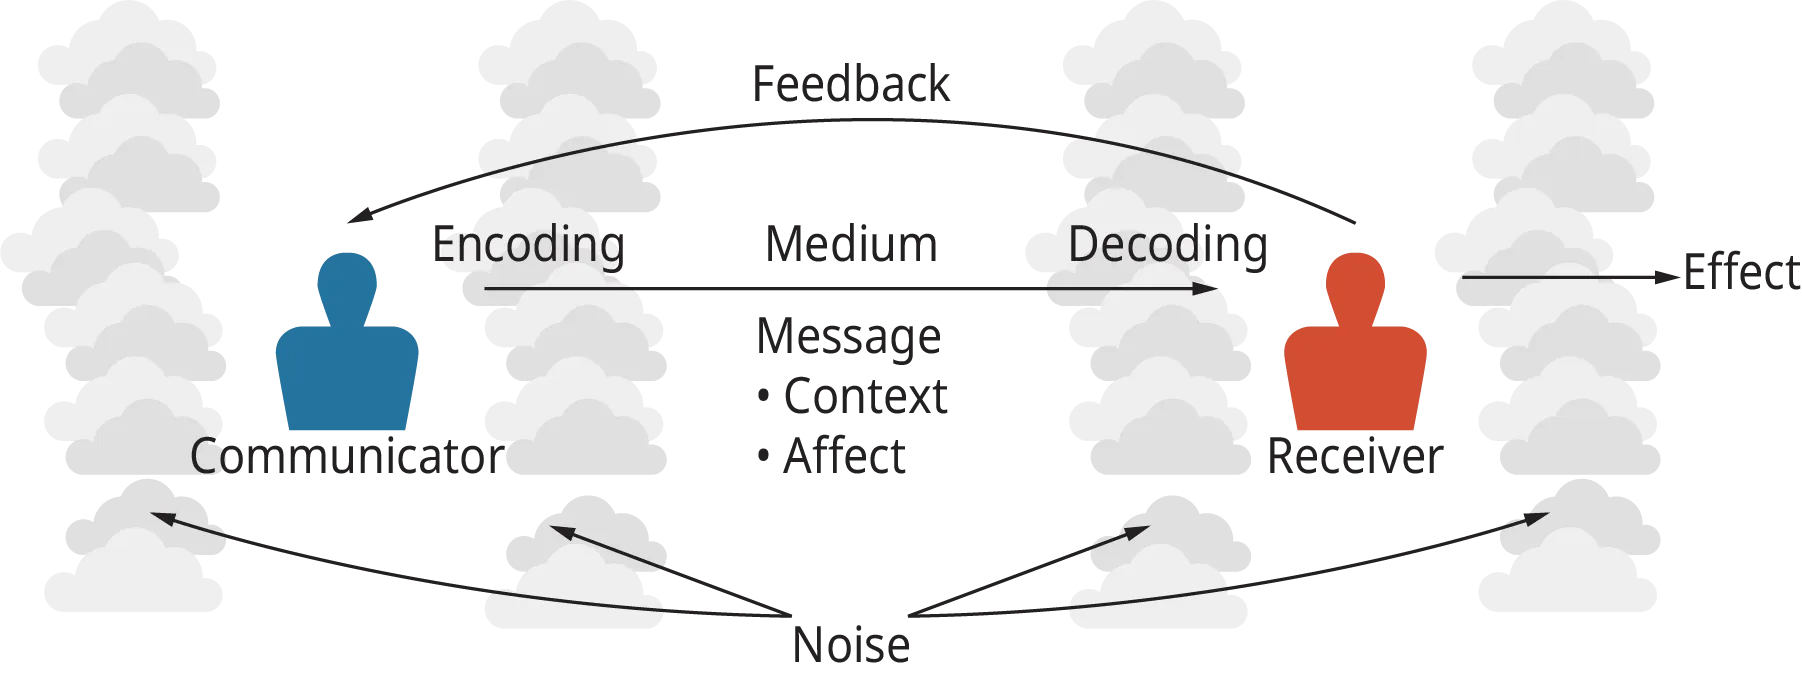 An illustration shows the process of dissemination of information through the basic model of communication.